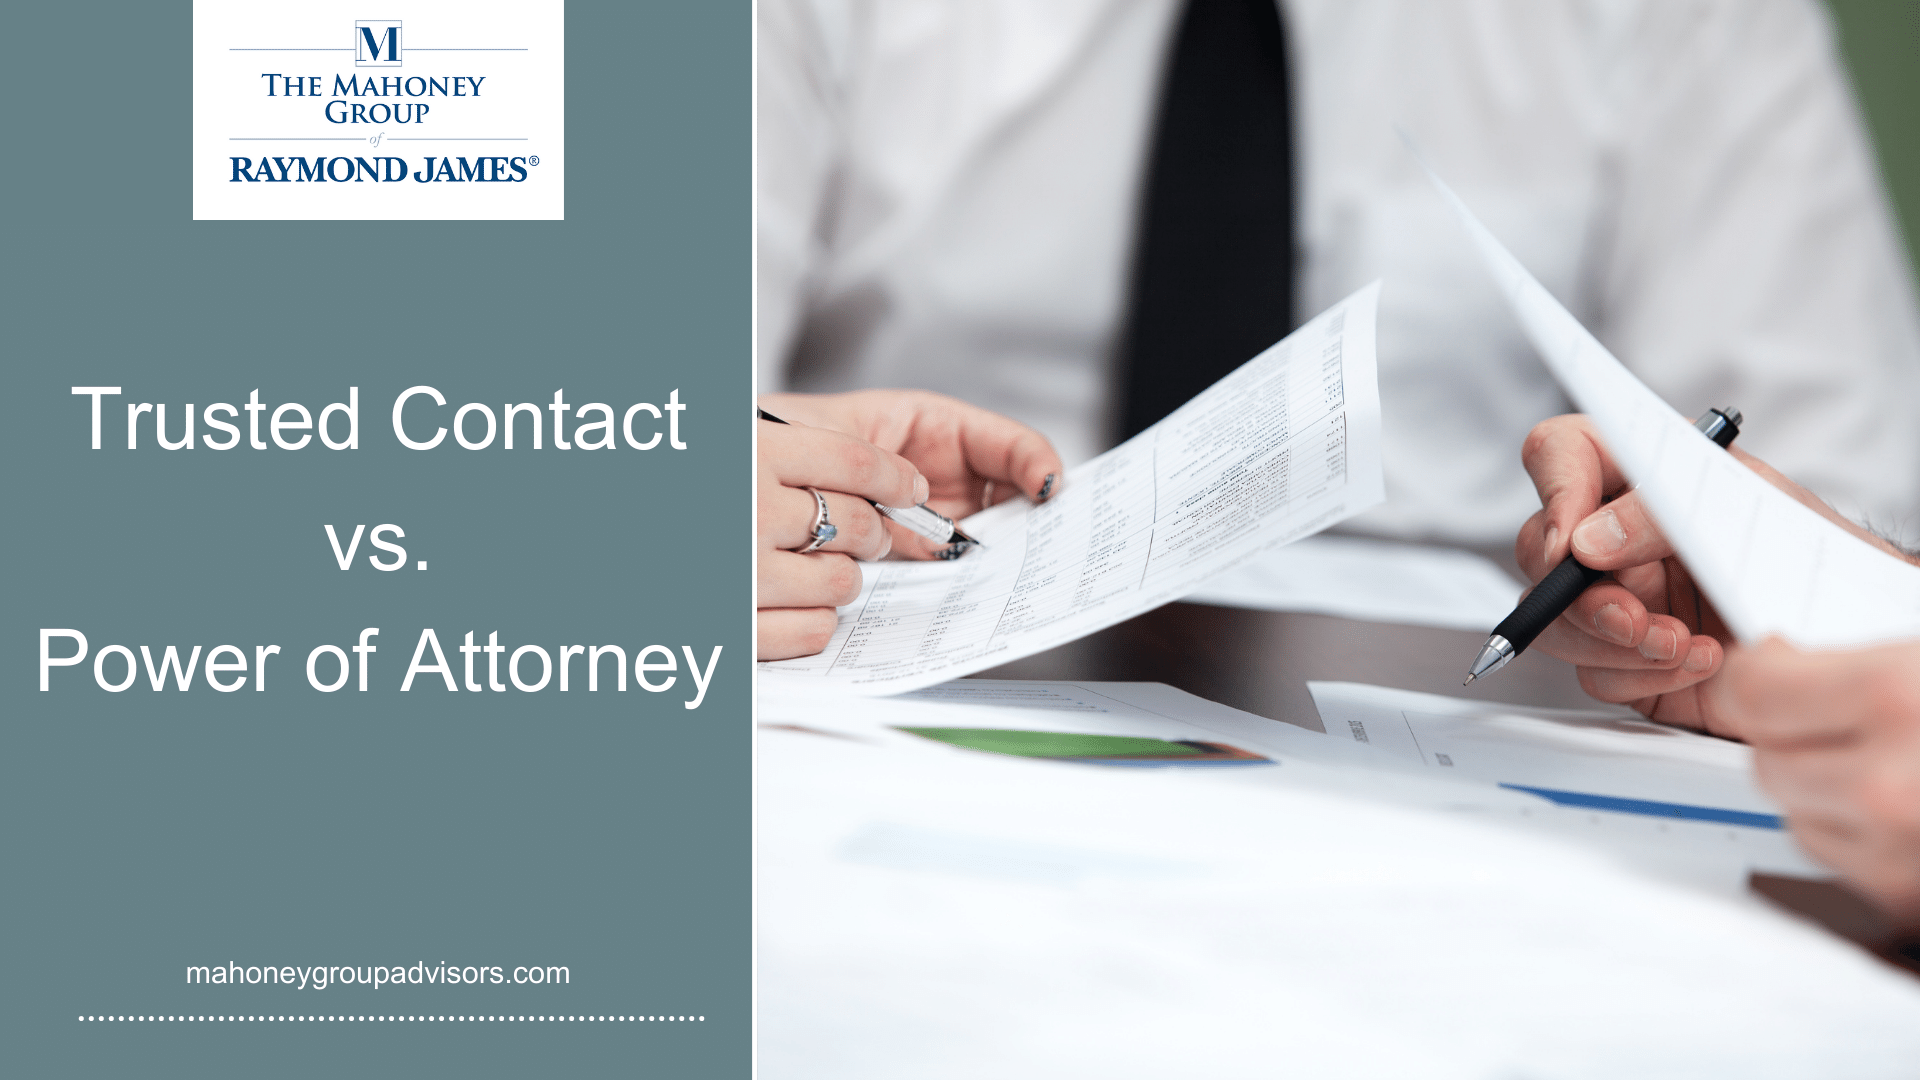 Trusted Contact vs Power of Attorney